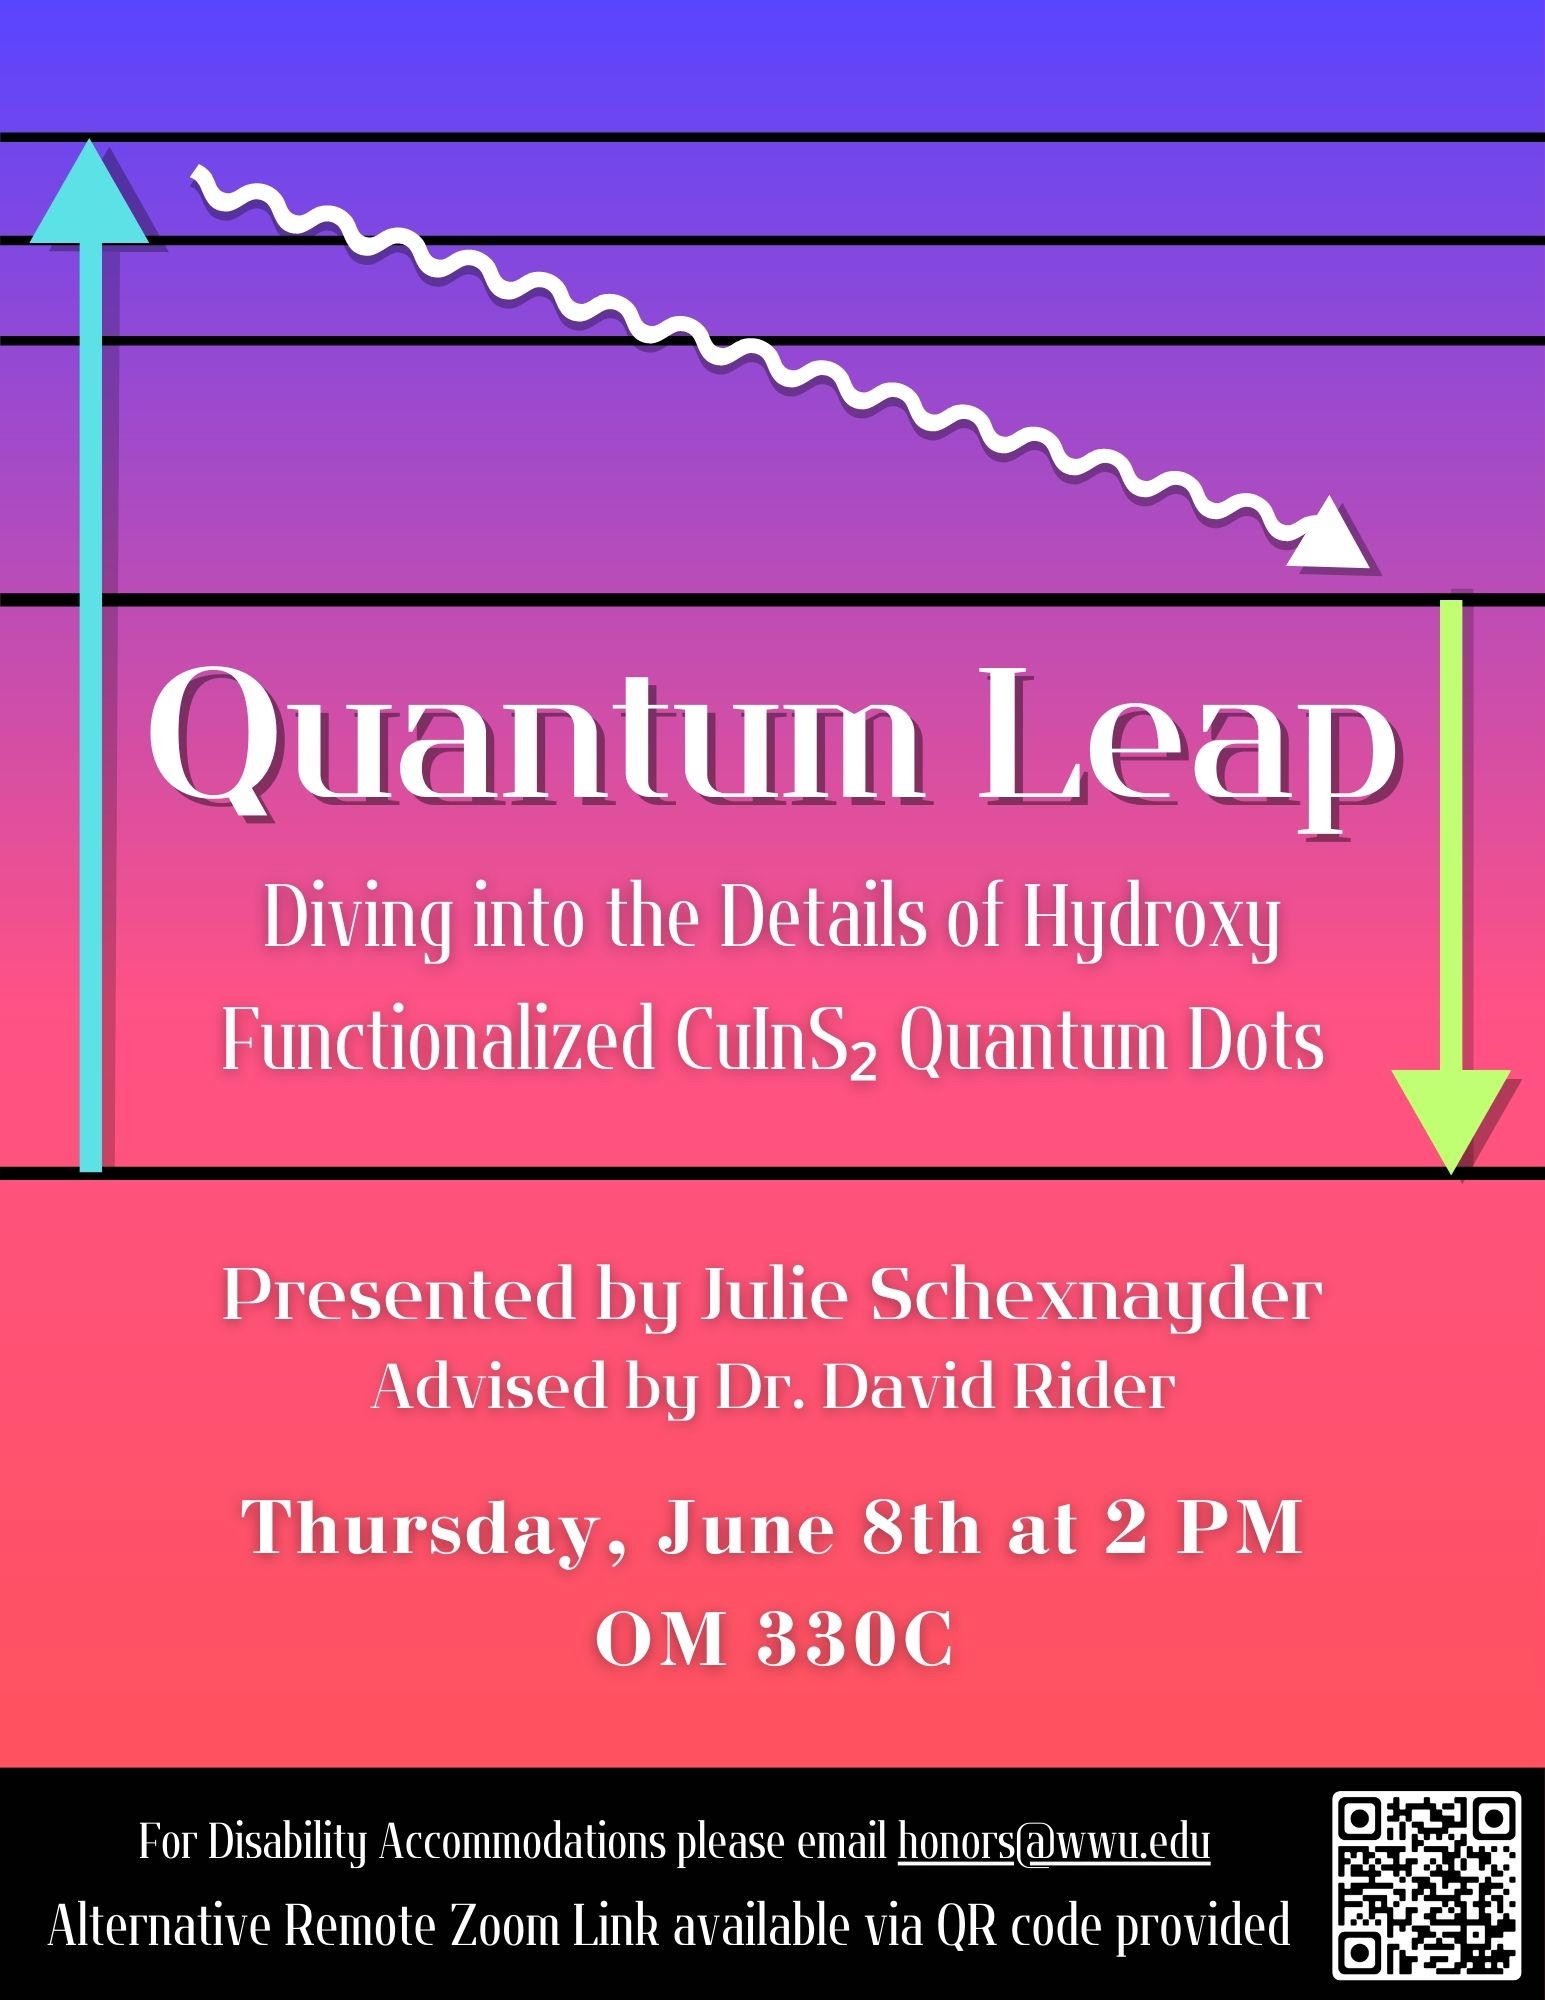 A poster with a blue to pink gradient, and two arrows pointing up and down connected by a swirly arrow. A QR code is on the bottom. Text reads: "Quantum Leap: Diving into the Details of Hydroxy Functionalized CulnS2 Quantum Dots. Presented by Julie Schexnayder, Advised by Dr. David Rider. Thursday, June 8 at 2pm. OM330C. For disability accommodations please email honors@wwu.edu. Alternative remote zoom link available via QR code provided."